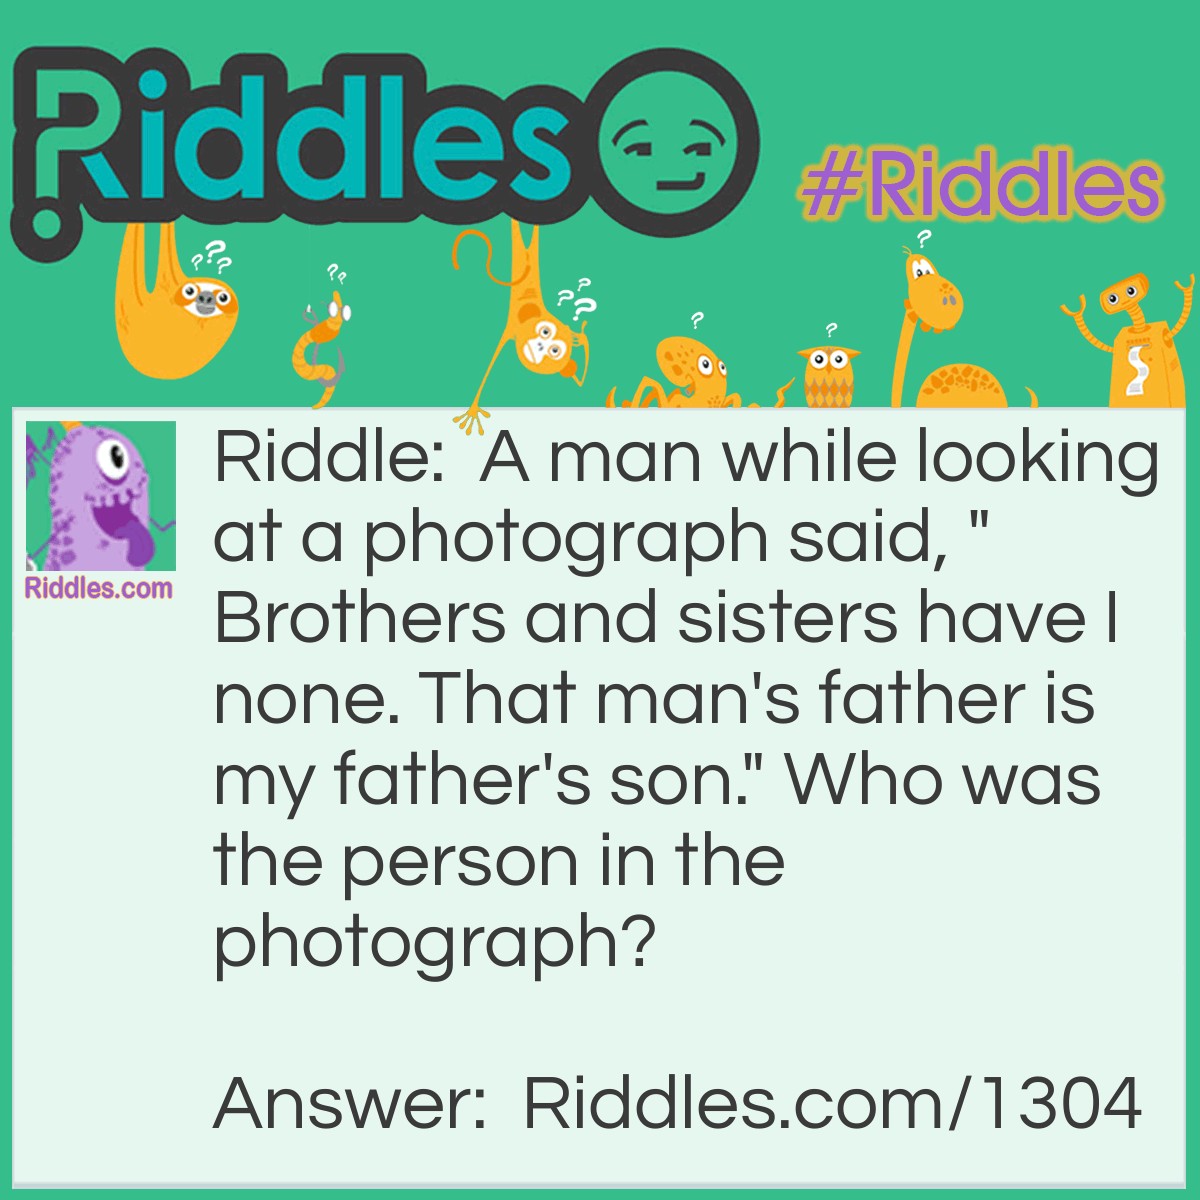 Riddle: A man while looking at a photograph said, "Brothers and sisters have I none. That man's father is my father's son." Who was the person in the photograph? Answer: That man's son.